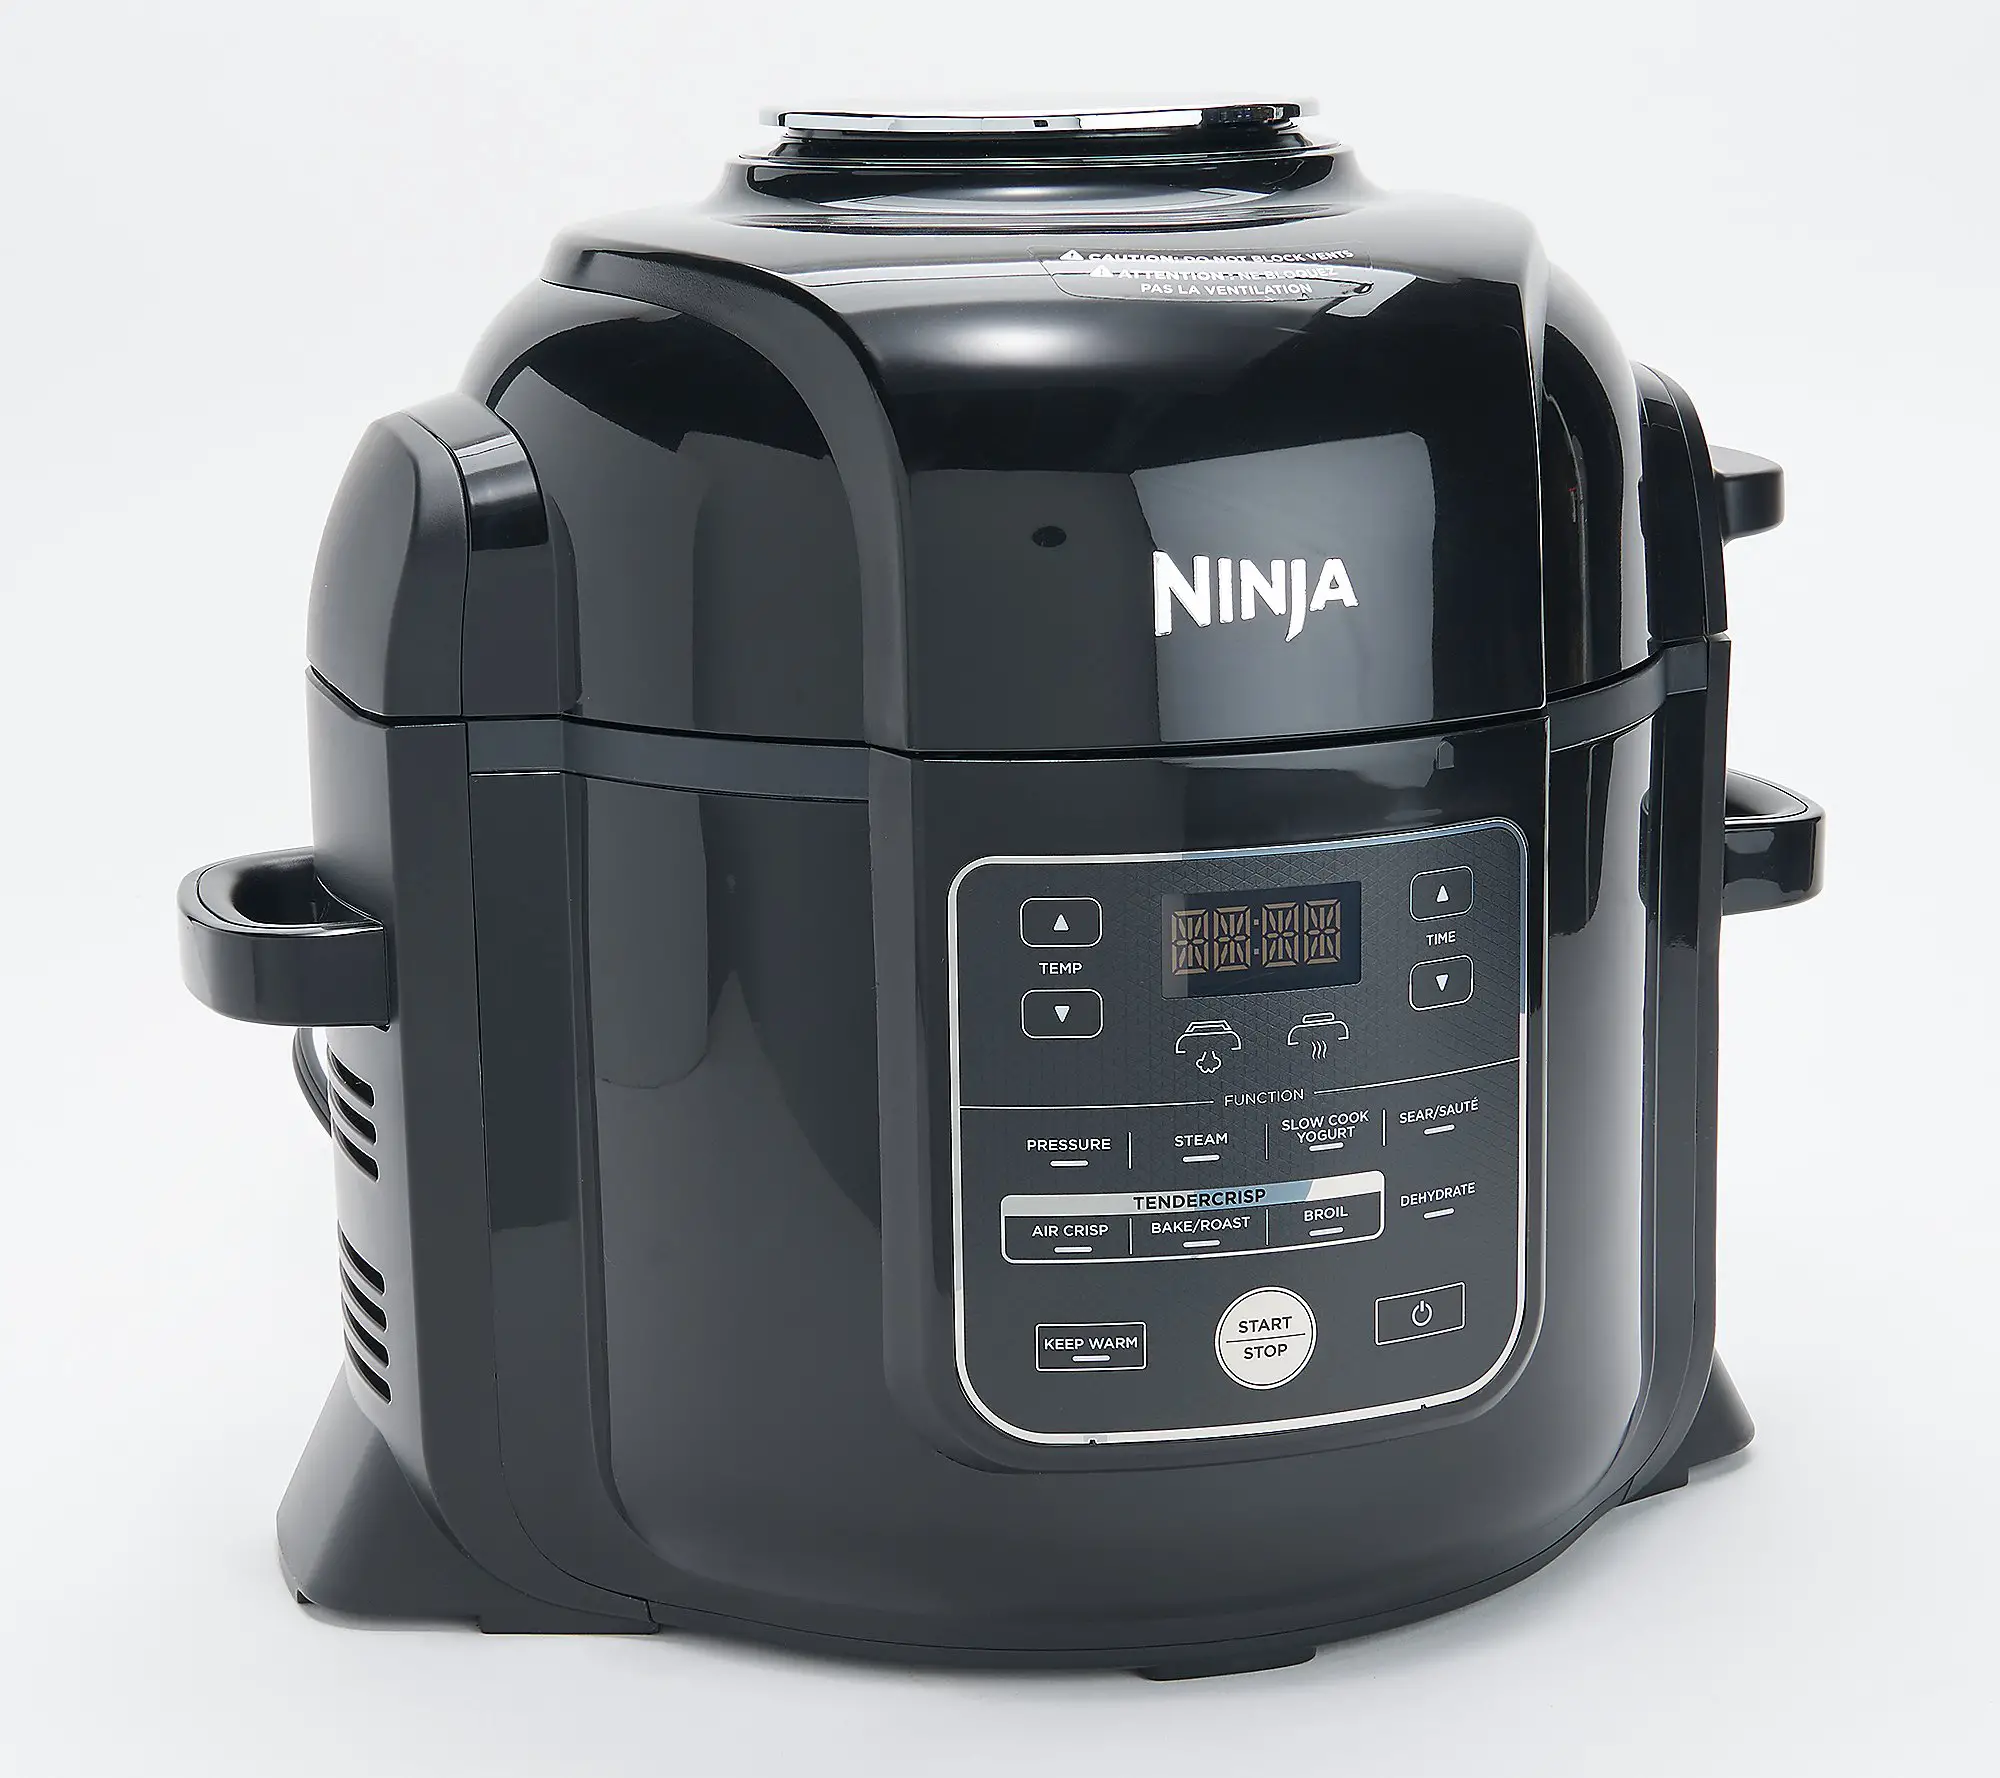 Low Calorie Dinners In The Ninja Pressure Cooker / So finally you can ...